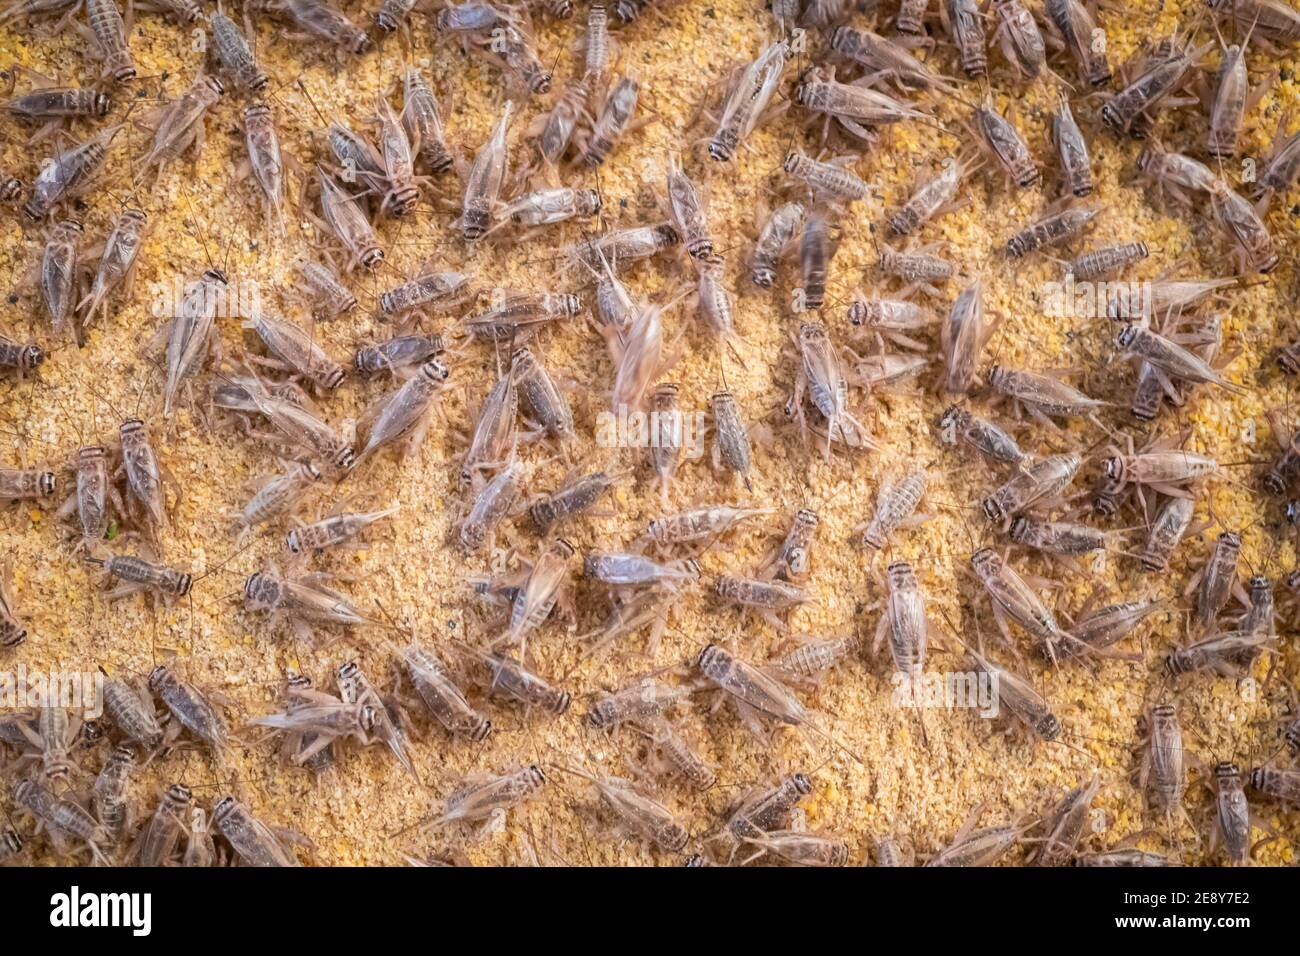 Feeding crickets in a cement pond Stock Photo